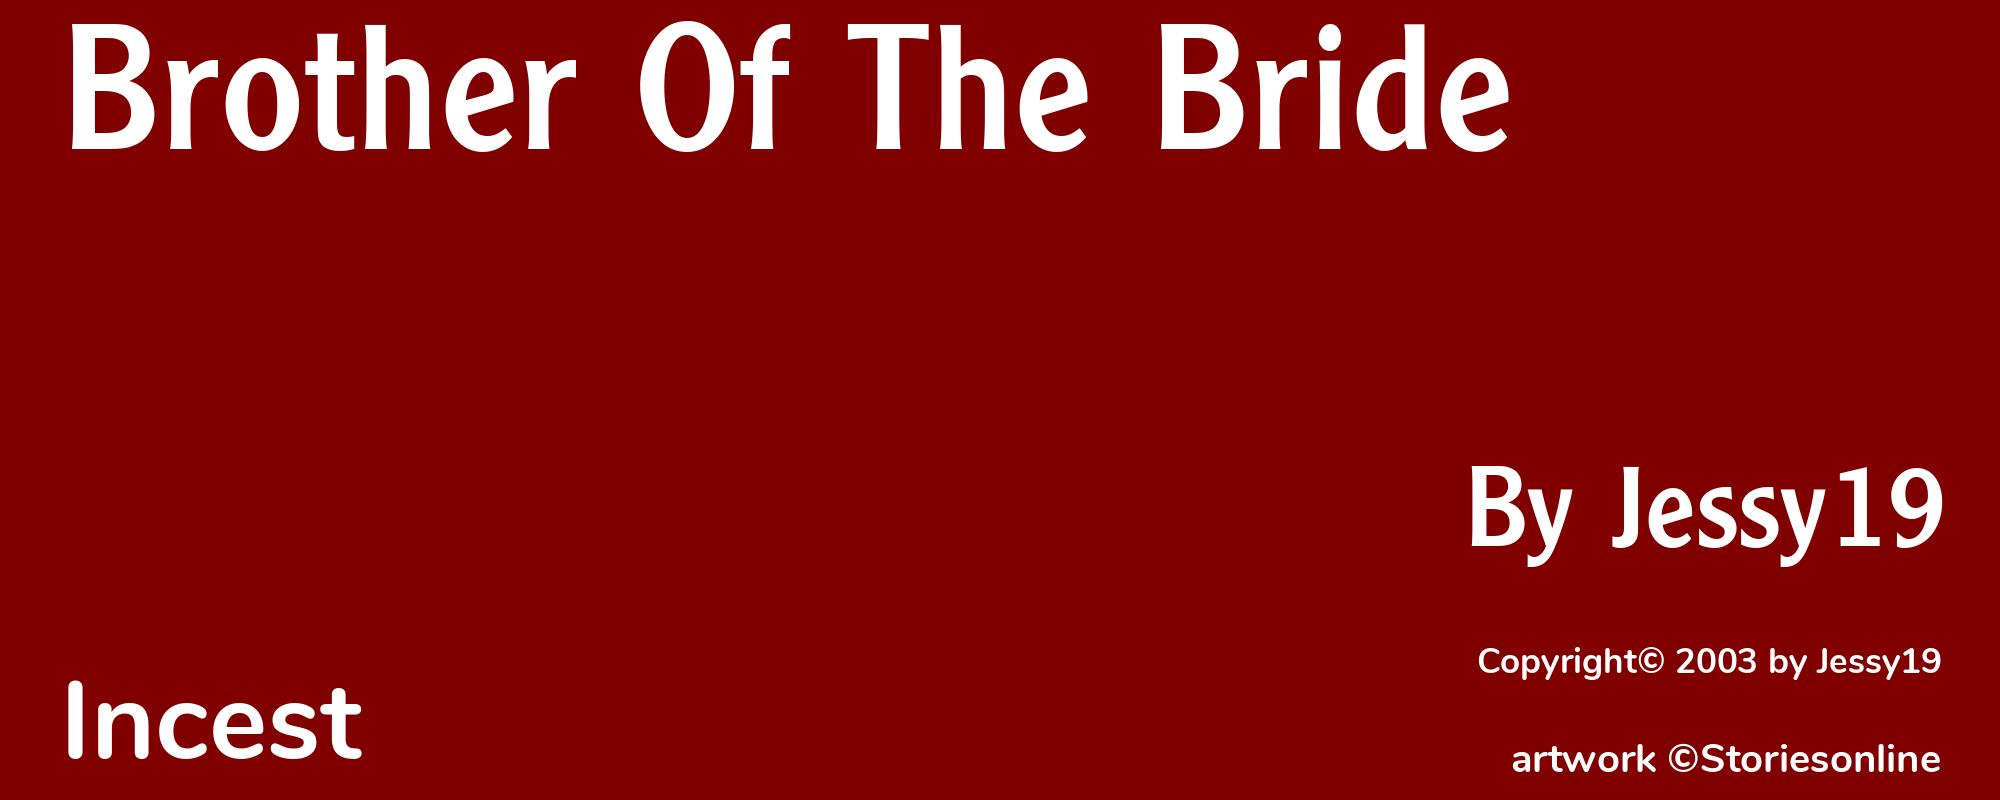 Brother Of The Bride - Cover